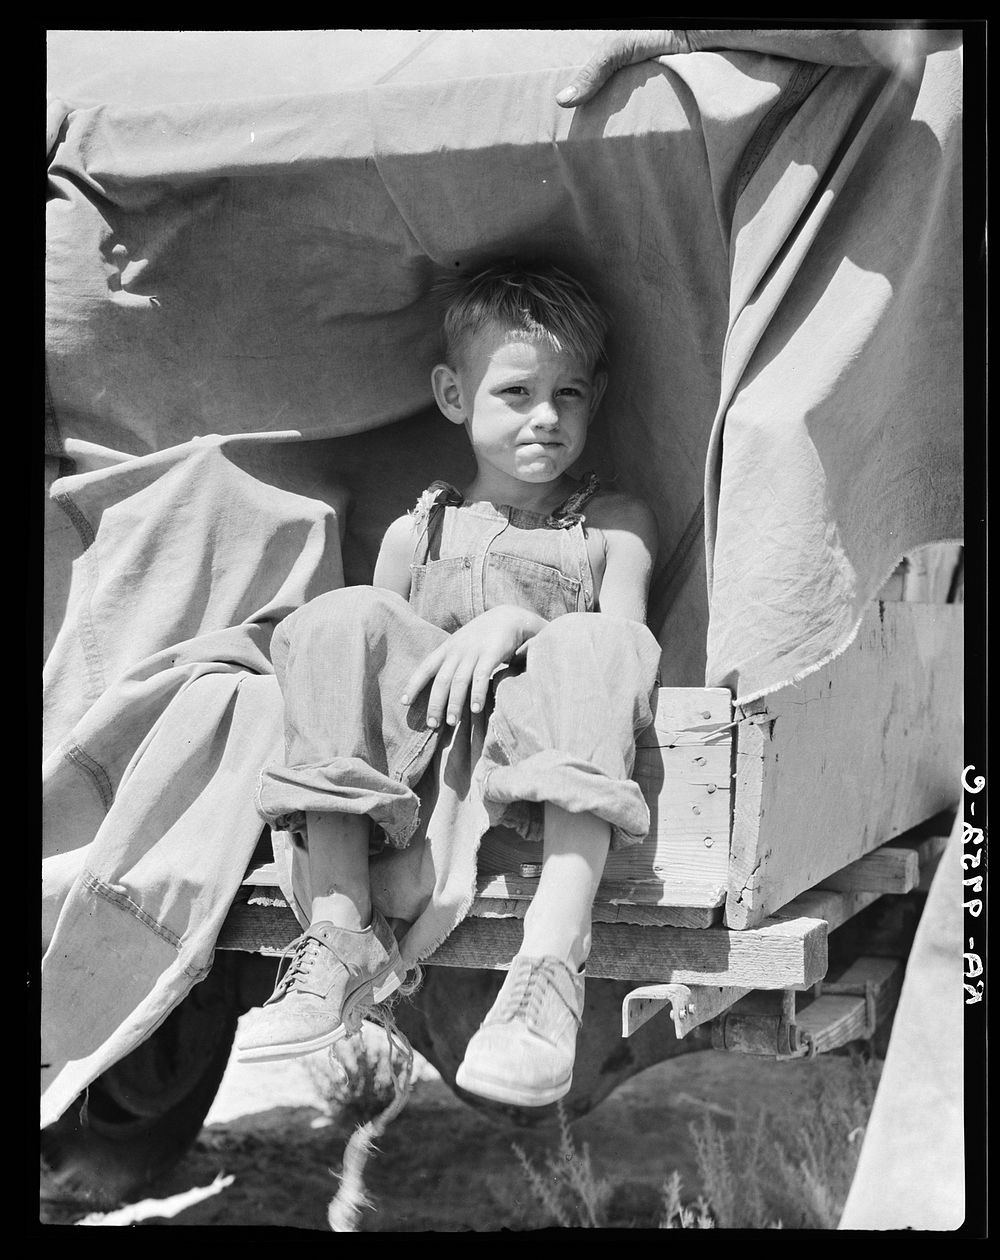 Child of an impoverished family from Iowa stranded in New Mexico by Dorothea Lange